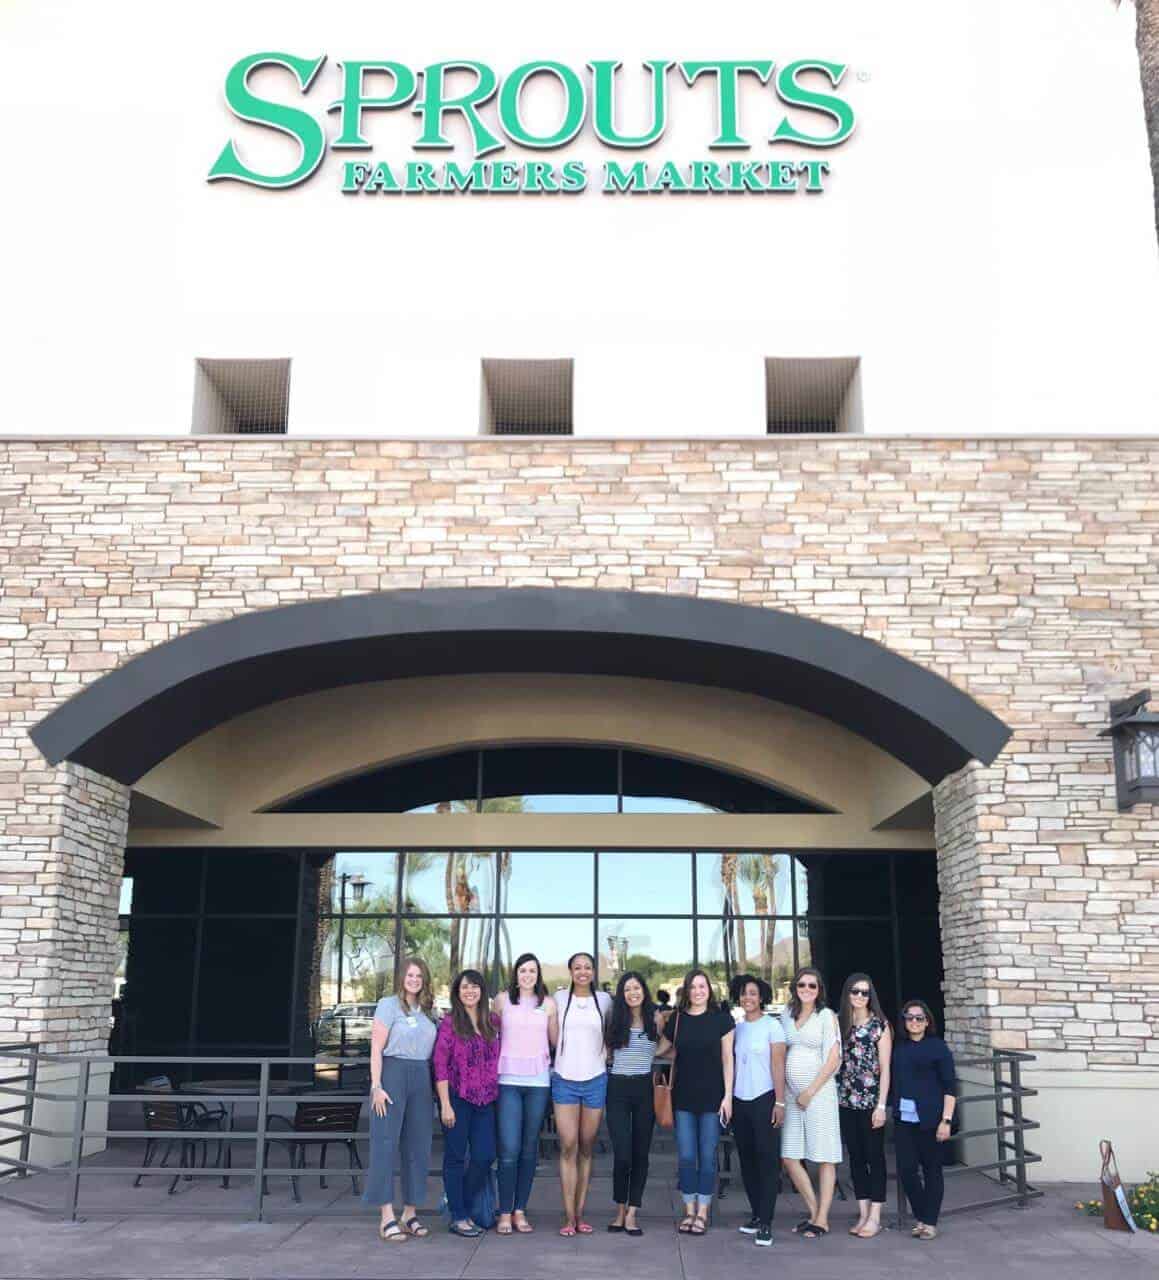 Group of women standing in front of a Sprouts grocery store.